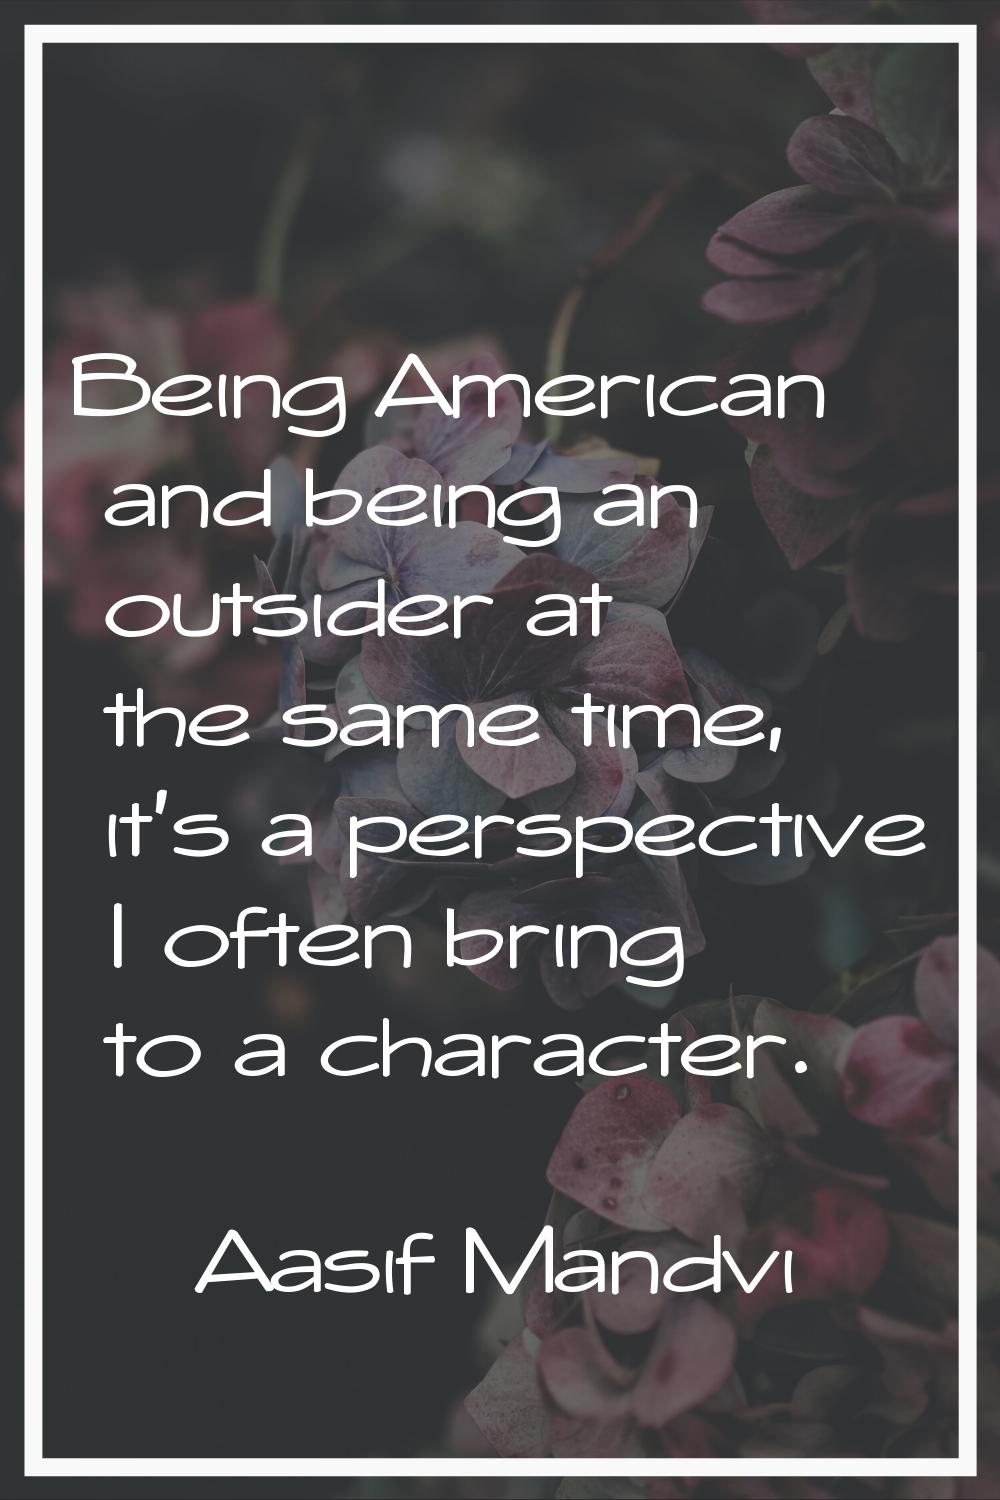 Being American and being an outsider at the same time, it's a perspective I often bring to a charac